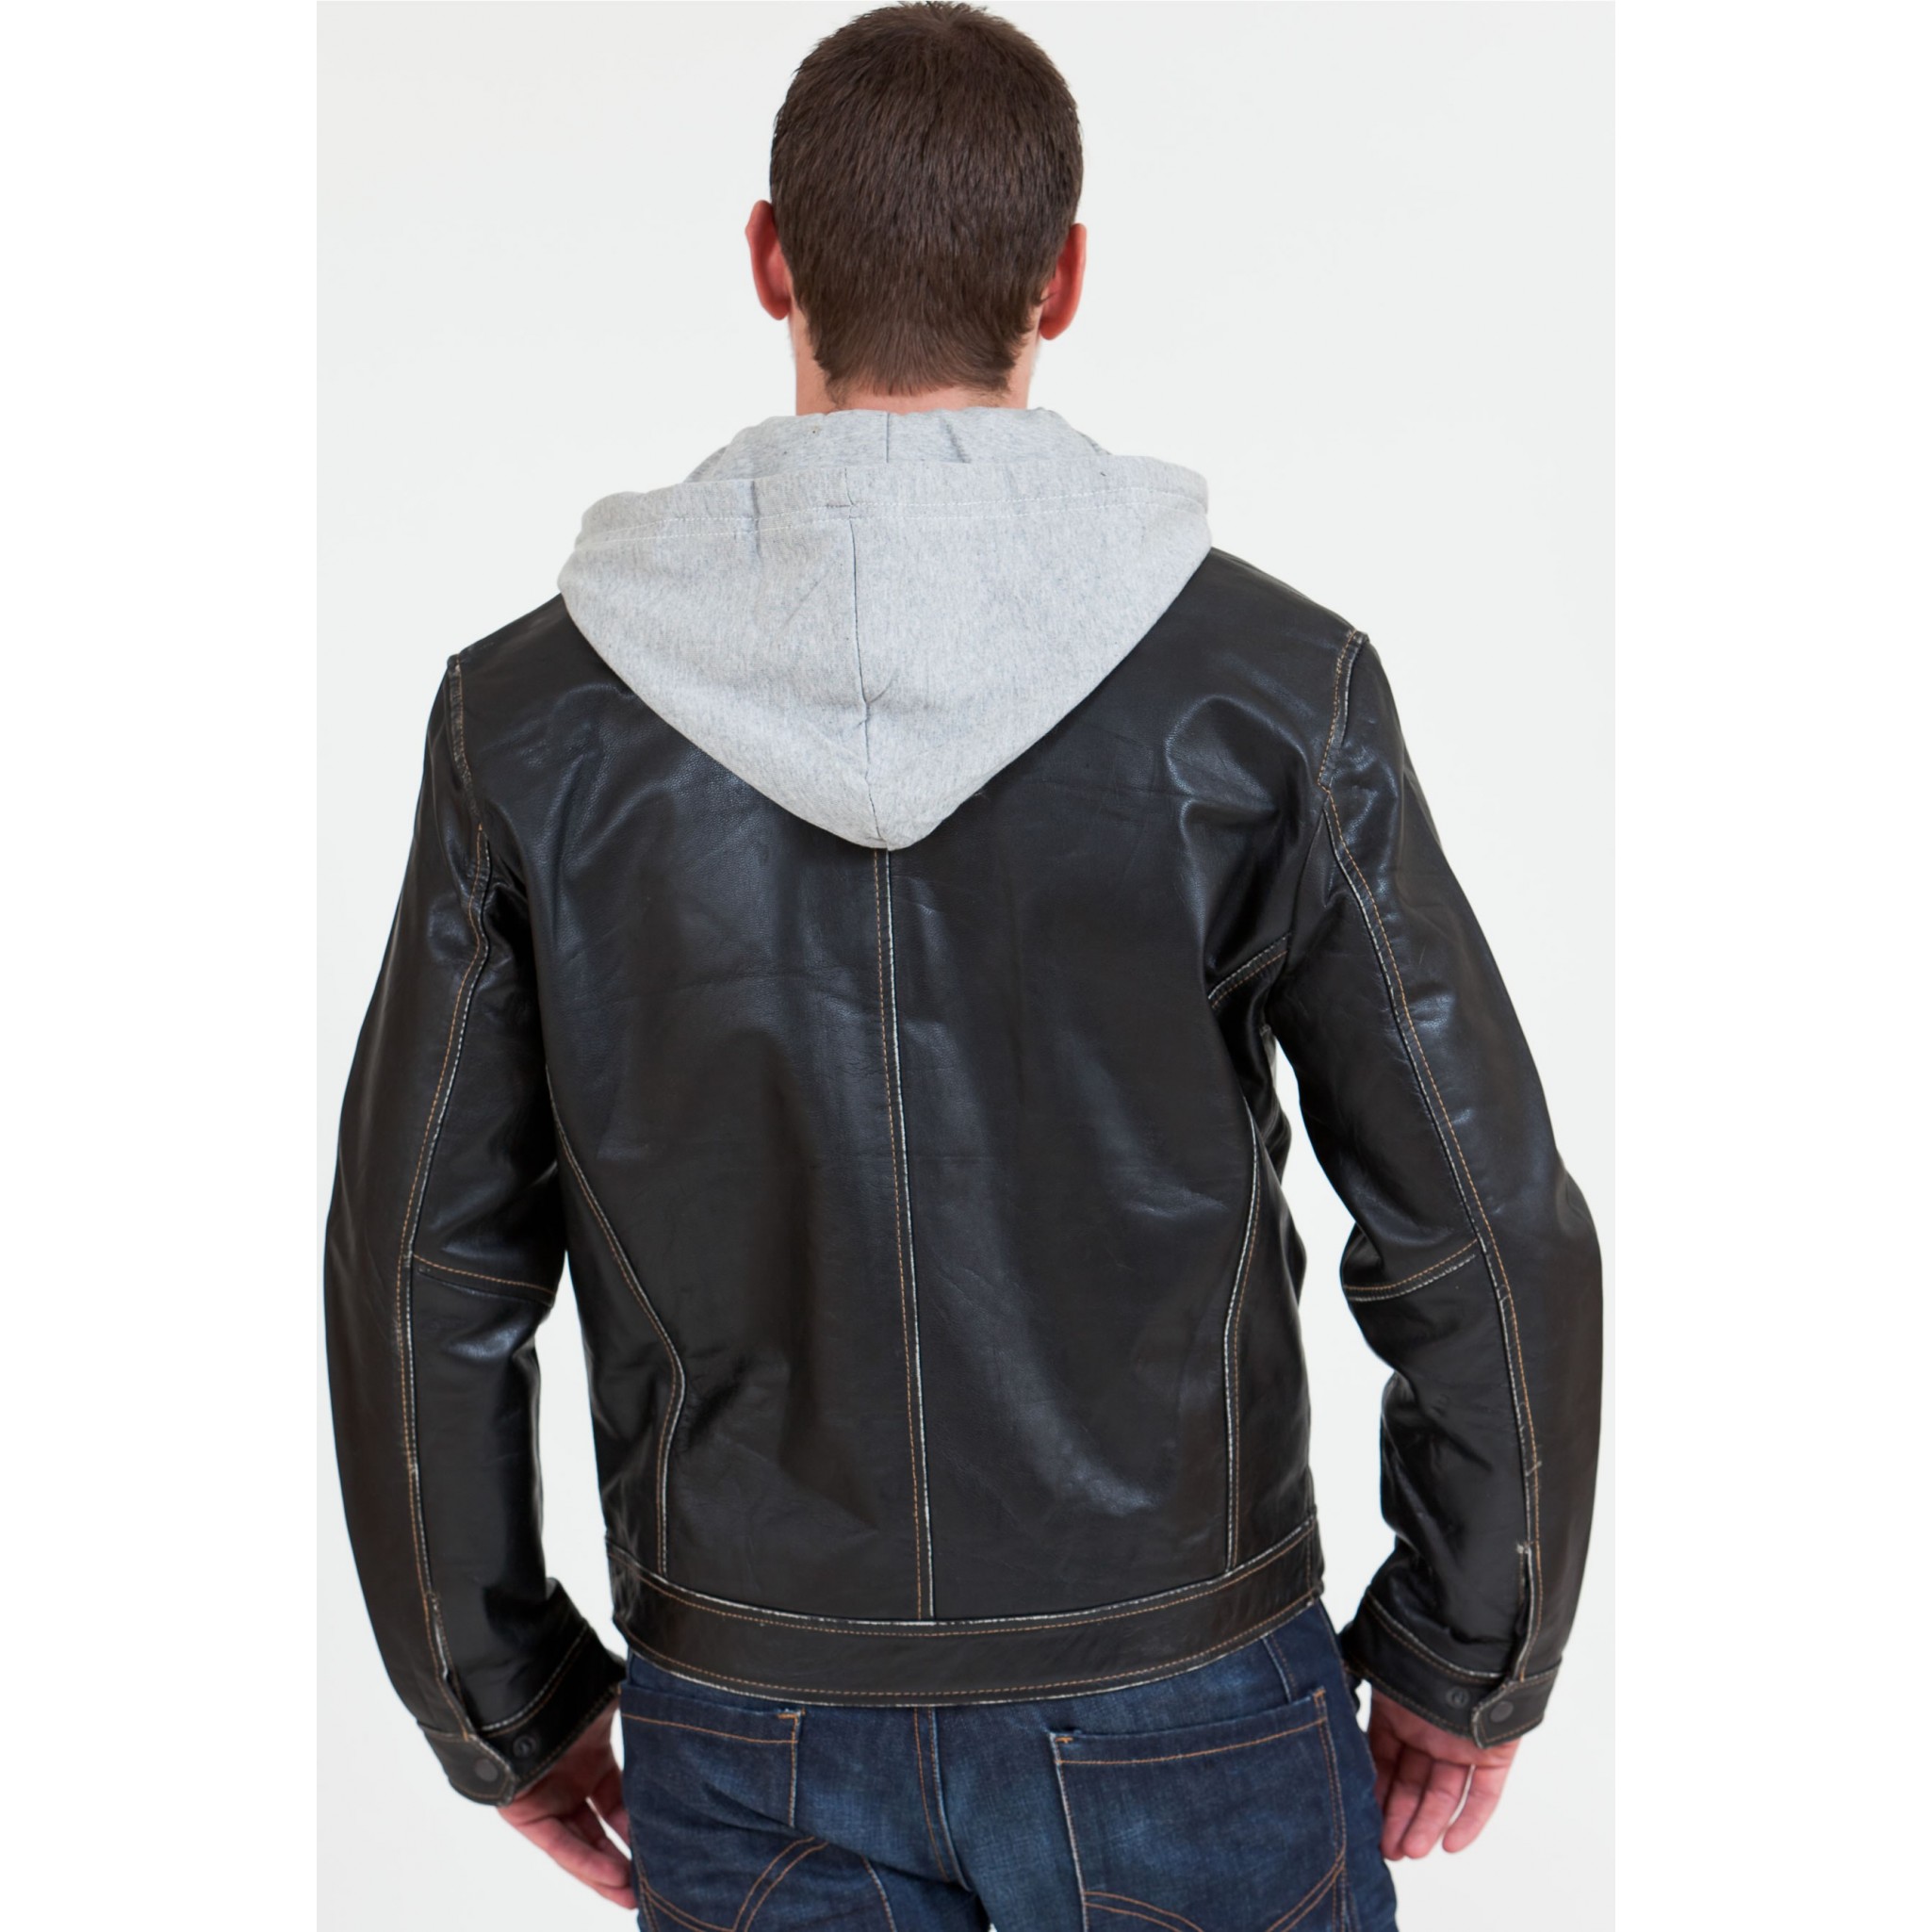 Images of Leather Jacket With Hood For Men - Reikian